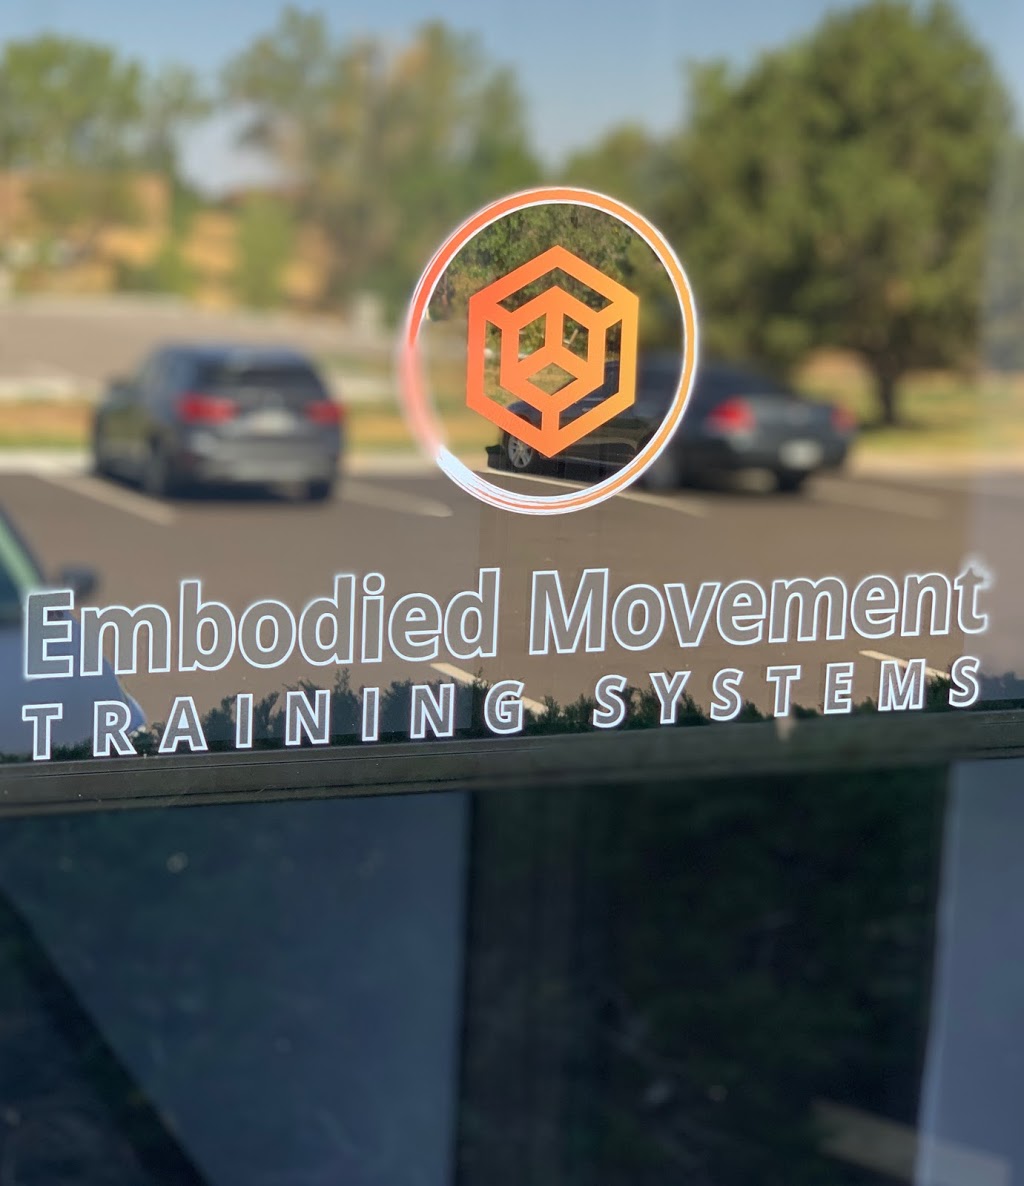 Embodied Movement Training Systems, LLC | 7399 S Tucson Way Unit C-2, Centennial, CO 80112, USA | Phone: (720) 491-1570